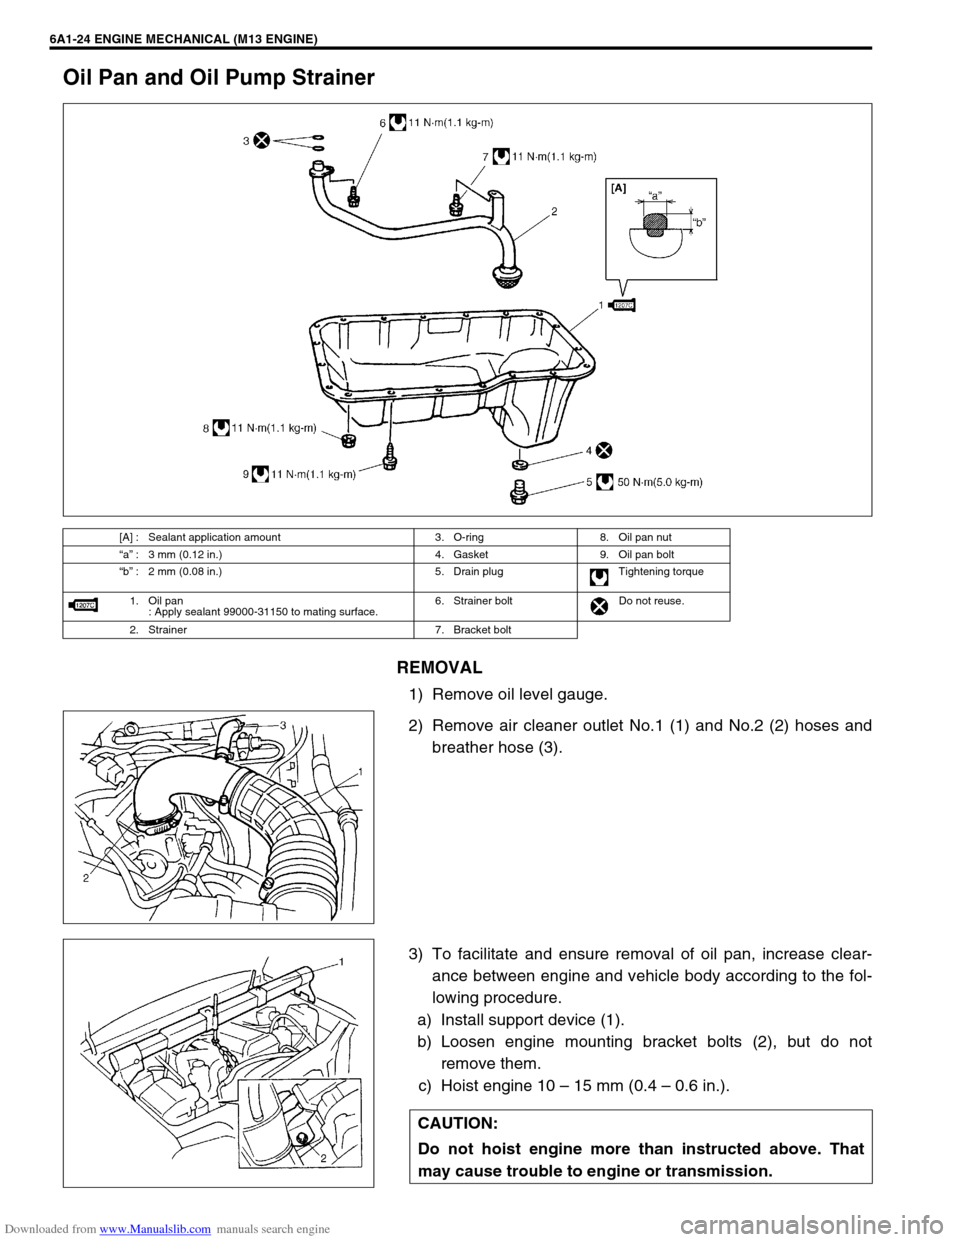 SUZUKI JIMNY 2005 3.G Service User Guide Downloaded from www.Manualslib.com manuals search engine 6A1-24 ENGINE MECHANICAL (M13 ENGINE)
Oil Pan and Oil Pump Strainer
REMOVAL
1) Remove oil level gauge.
2) Remove air cleaner outlet No.1 (1) an